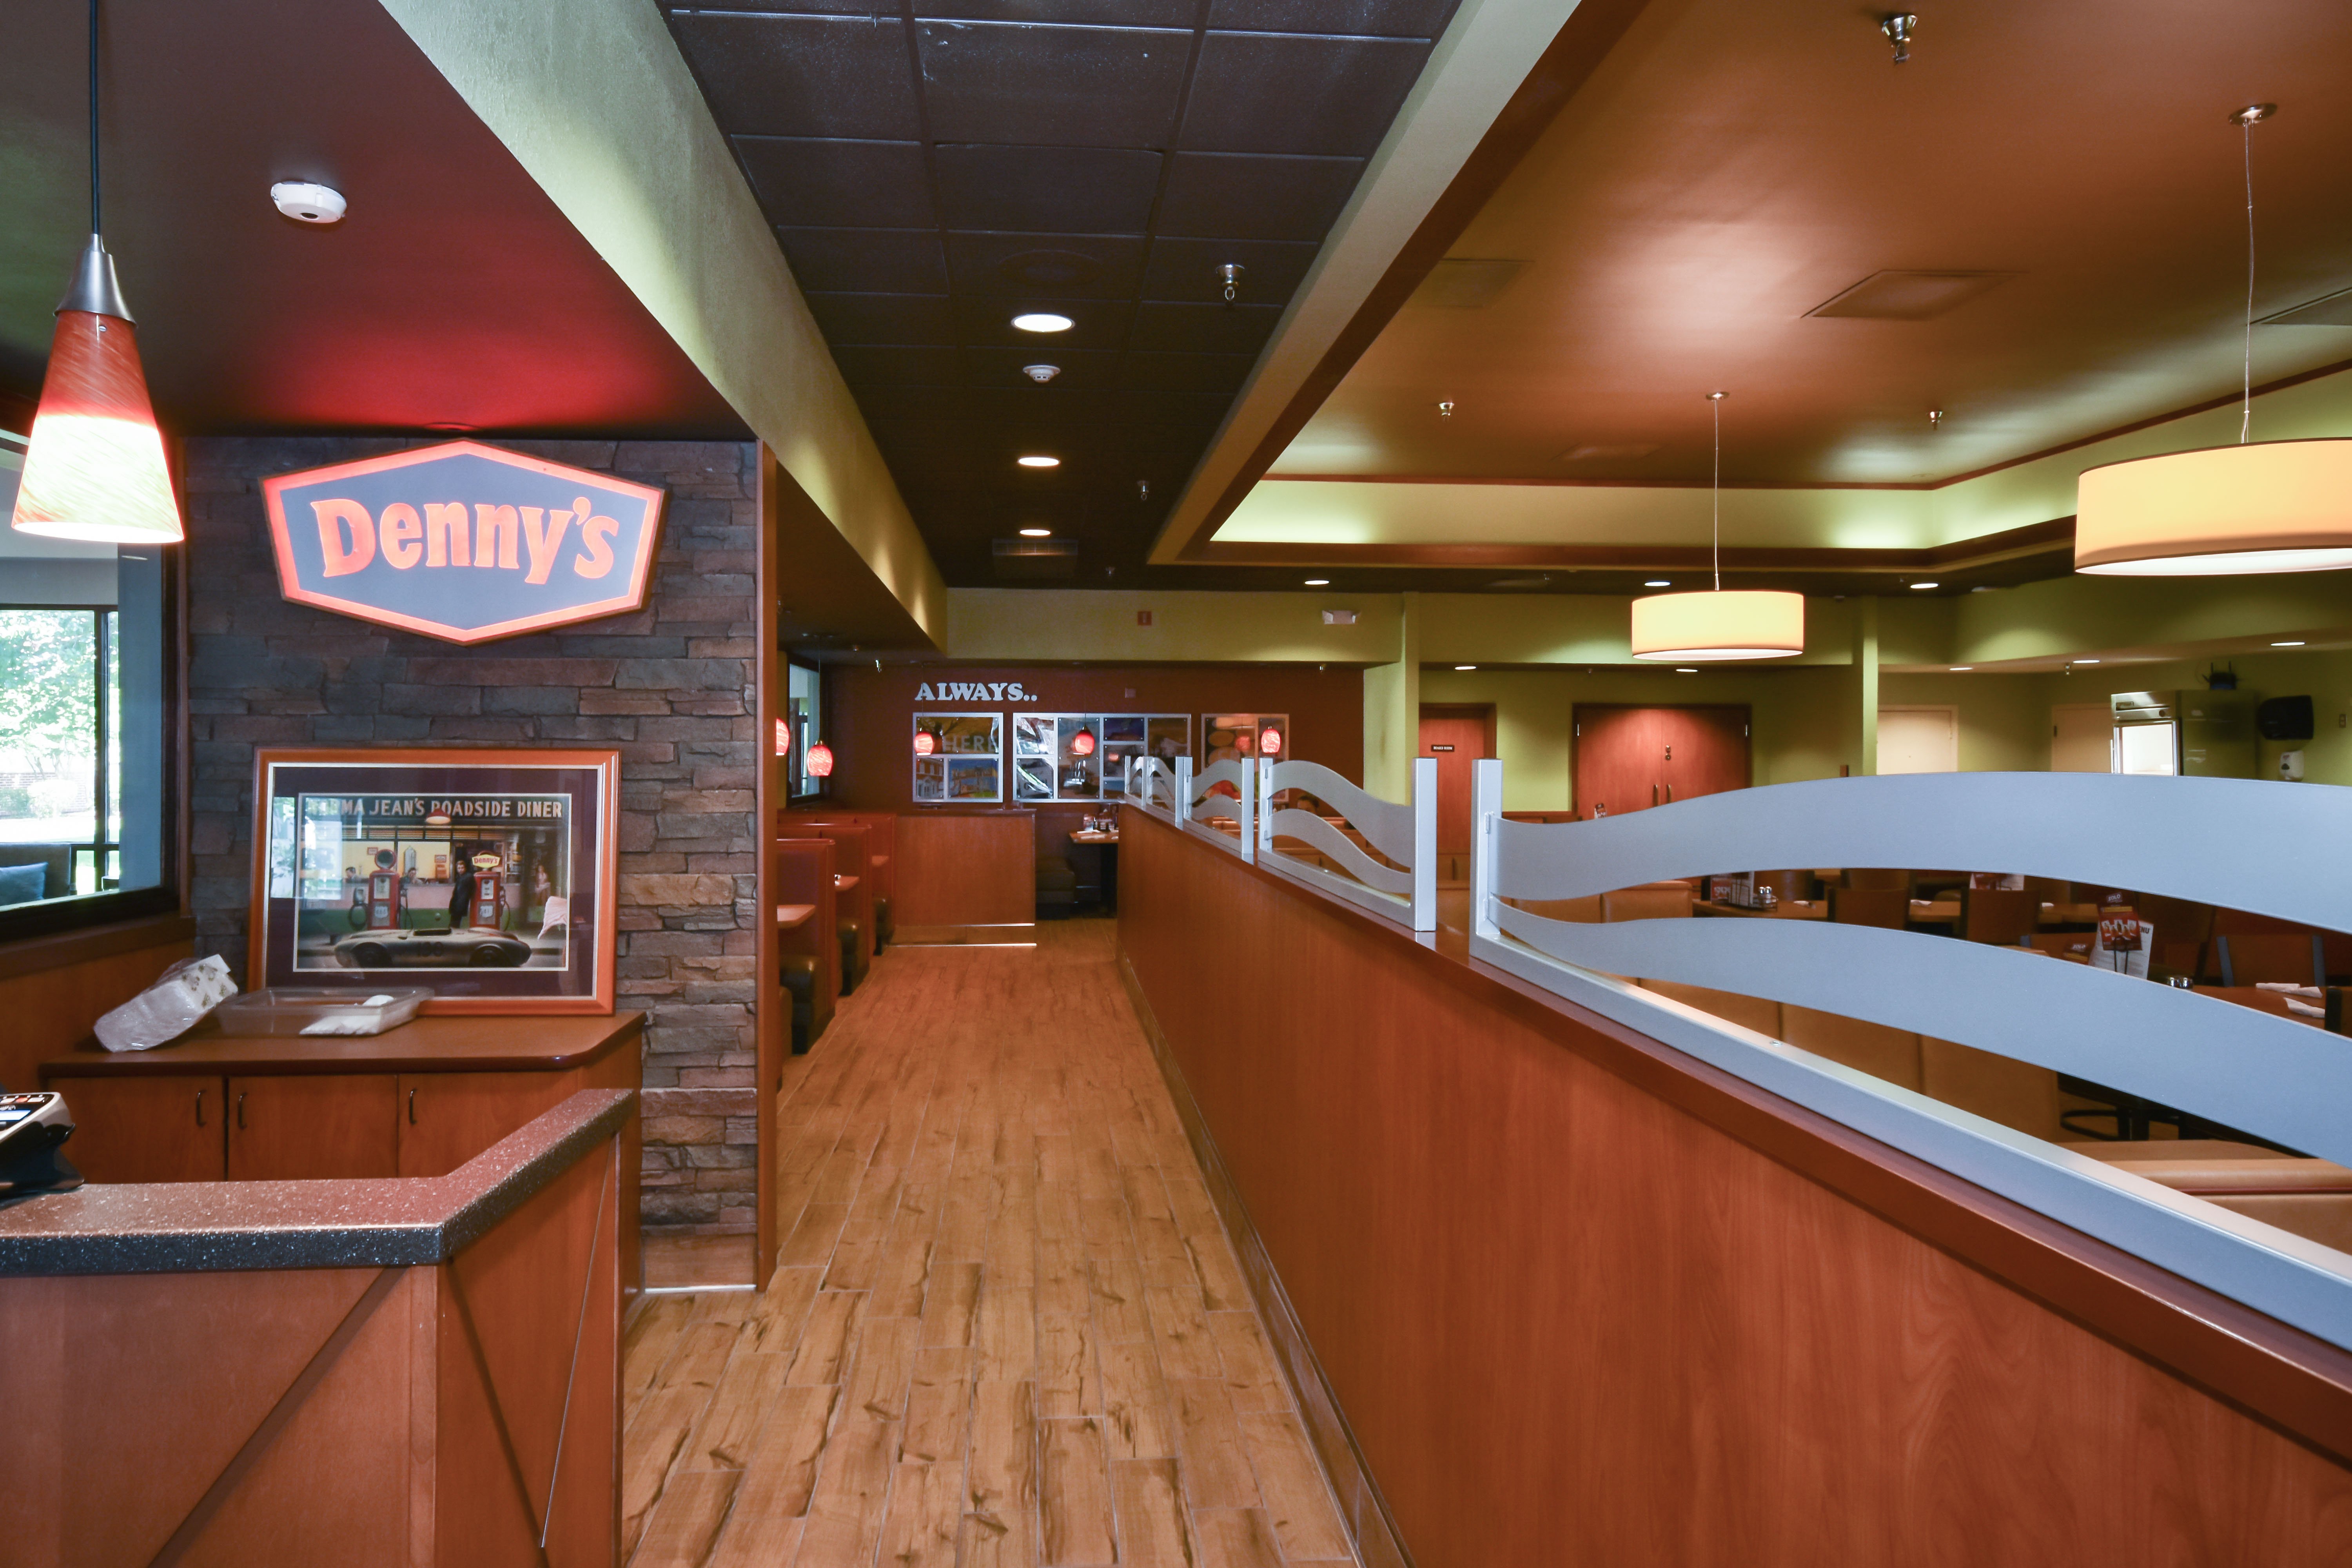 Denny's restaurant operates 24/7 with options on the menu for all.